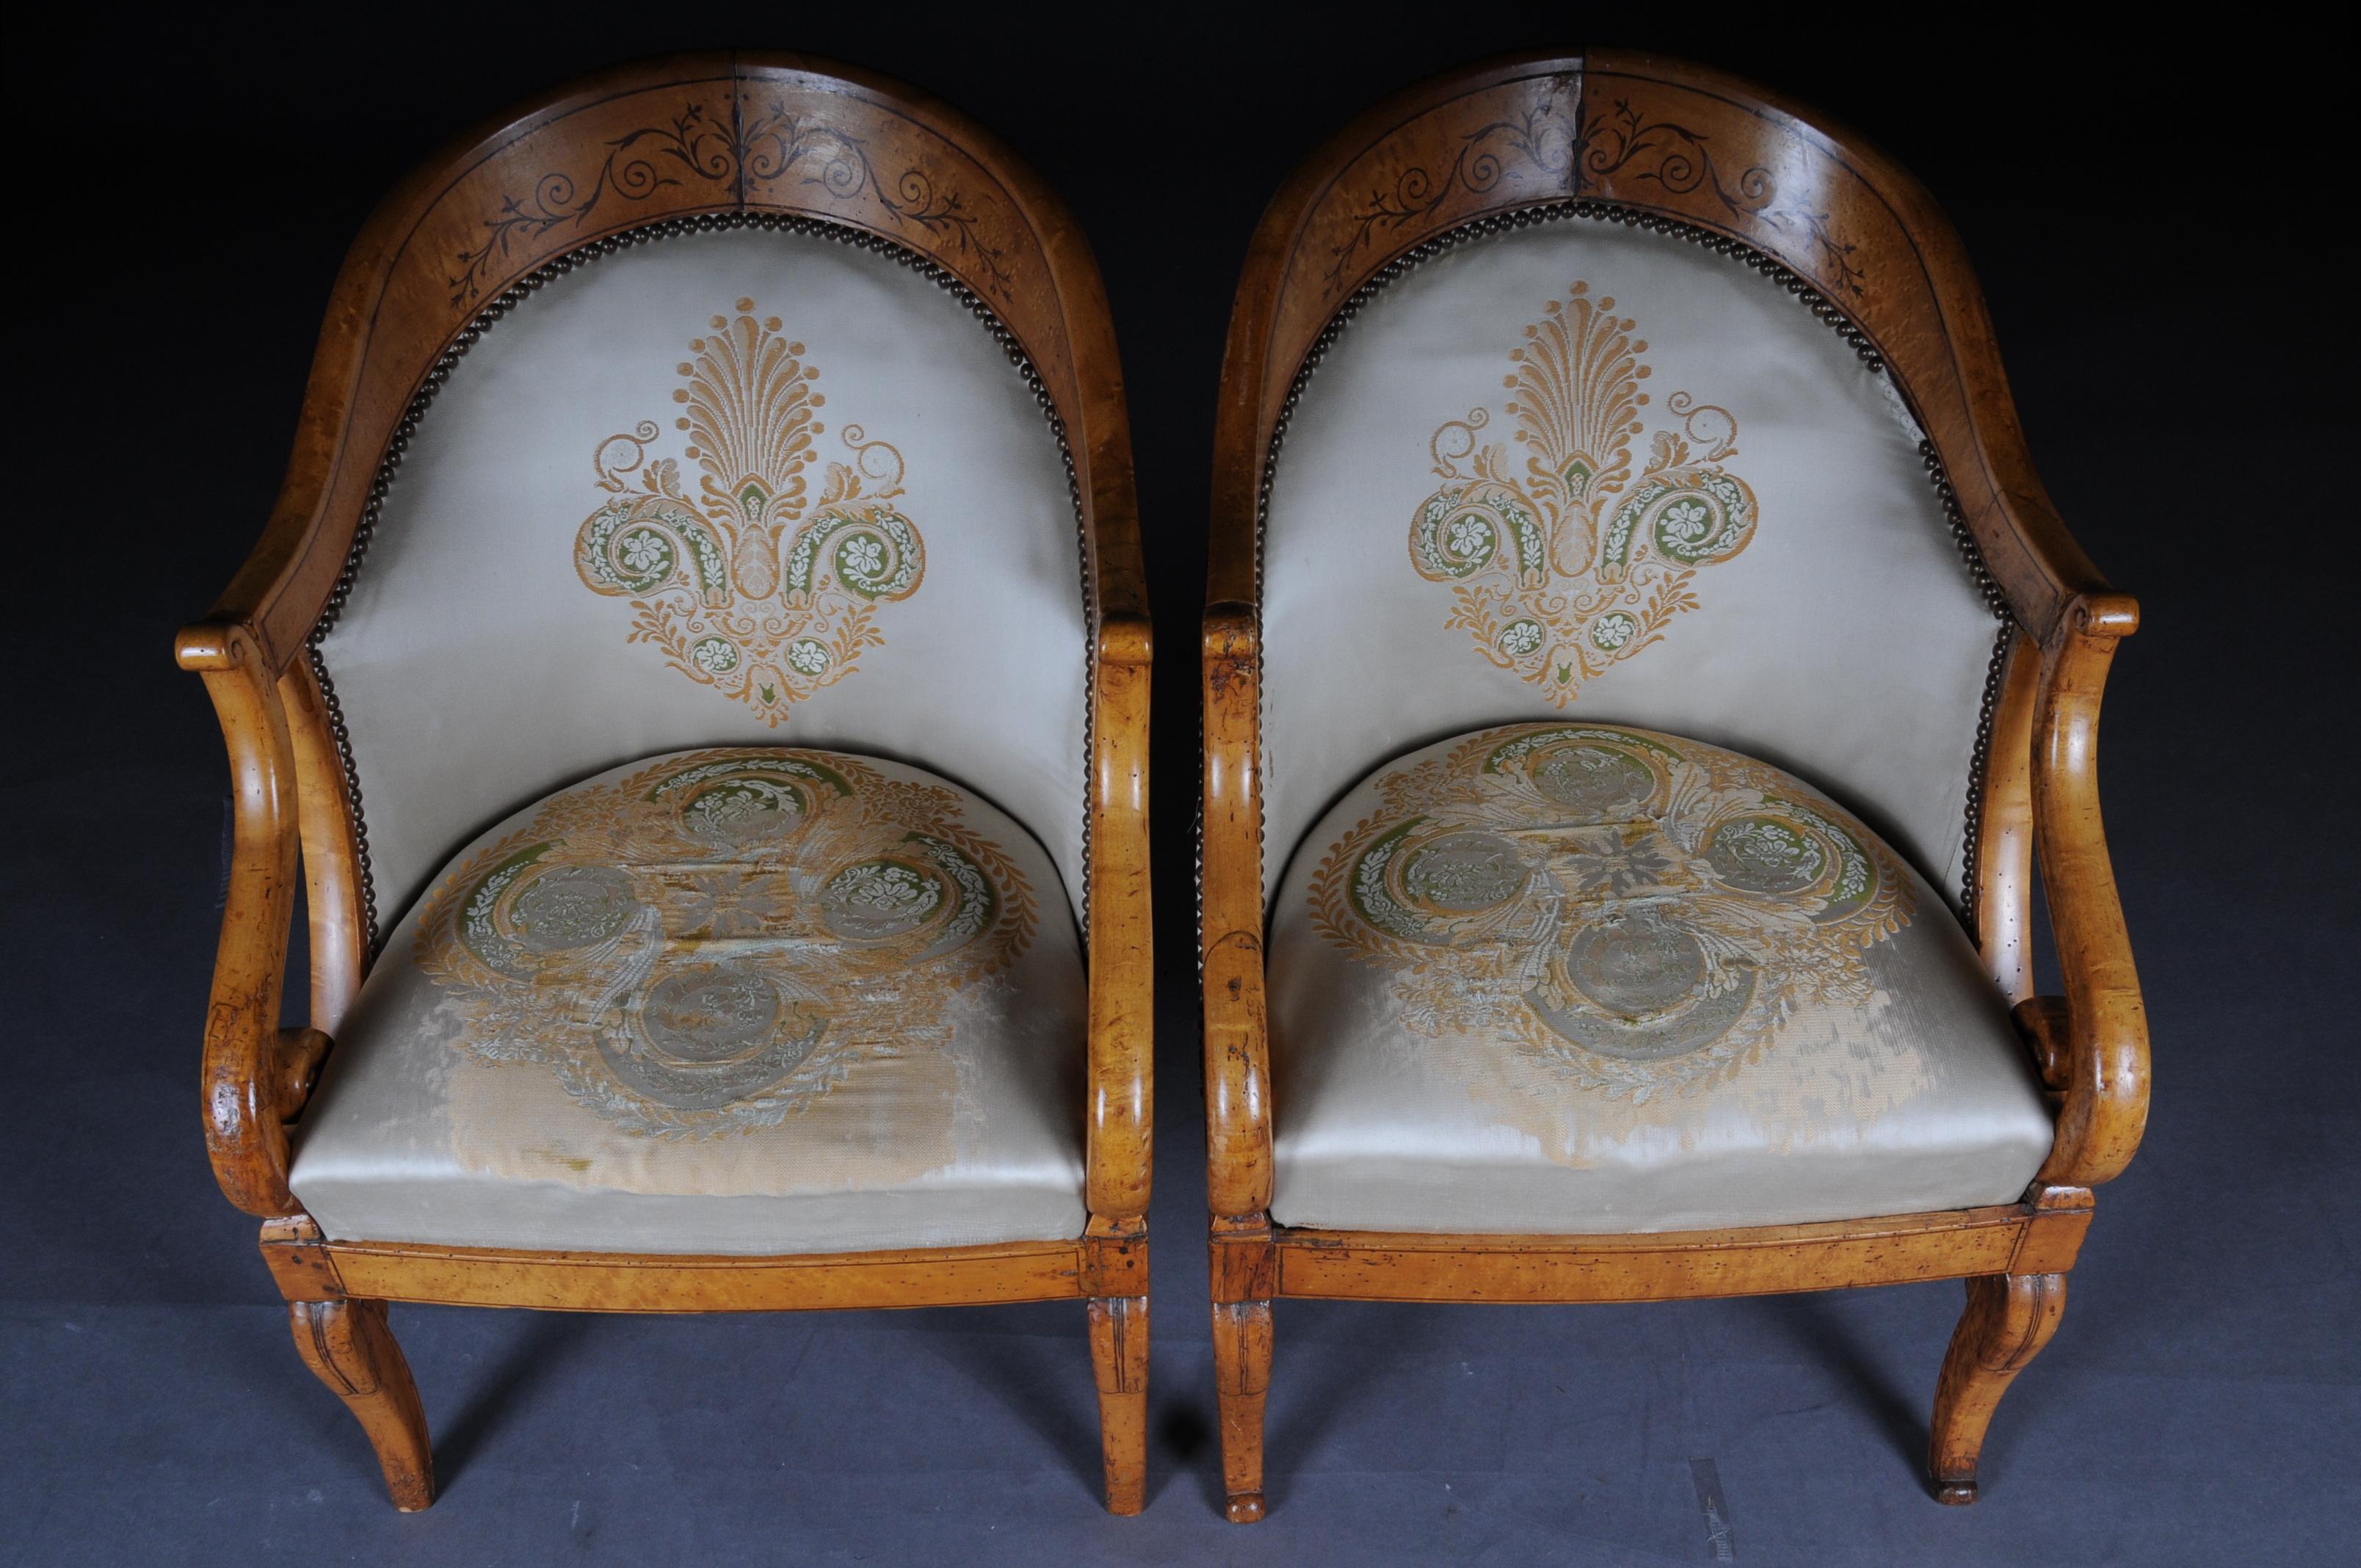 Set of Empire Armchairs / Chairs, Maple Wood, Paris, 1825 For Sale 2